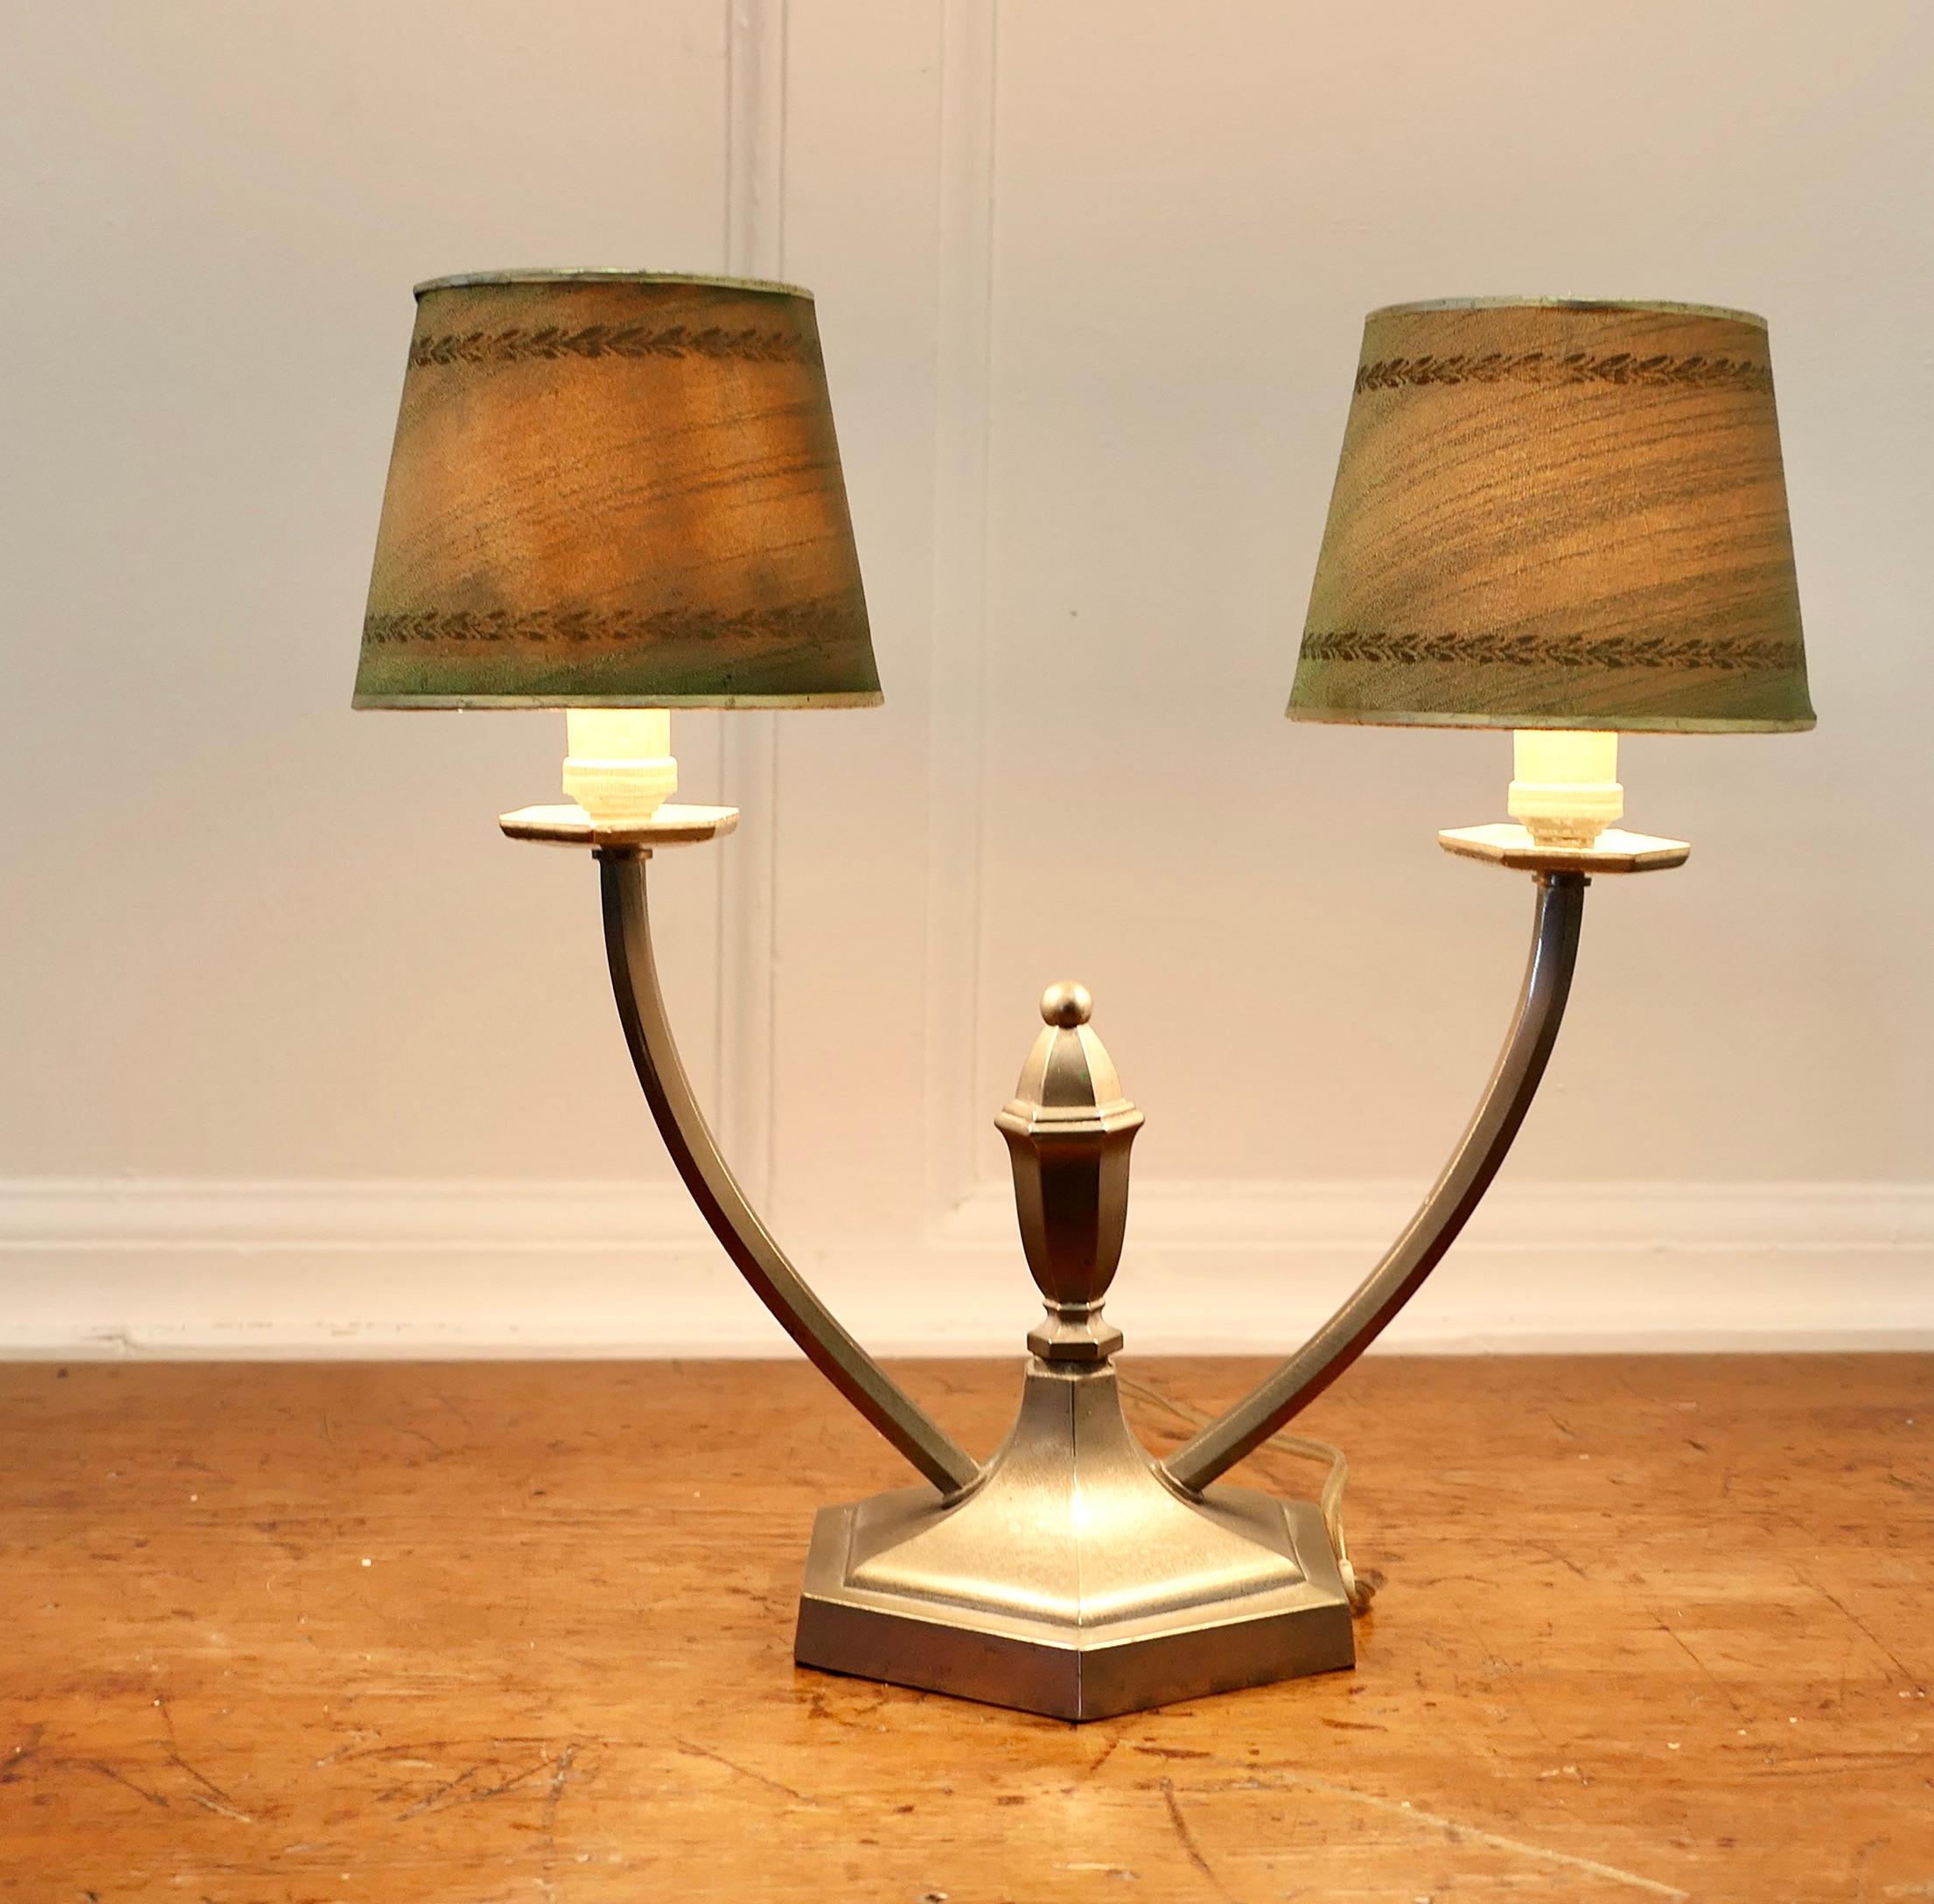 French Art Deco Twin Table Lamp

This is a charming piece, it is made in Steel and has 2 wide branches each topped with a delightful decorated Green paper shade
All in good working condition with an age related patina

The lamp is 12” tall, 13”